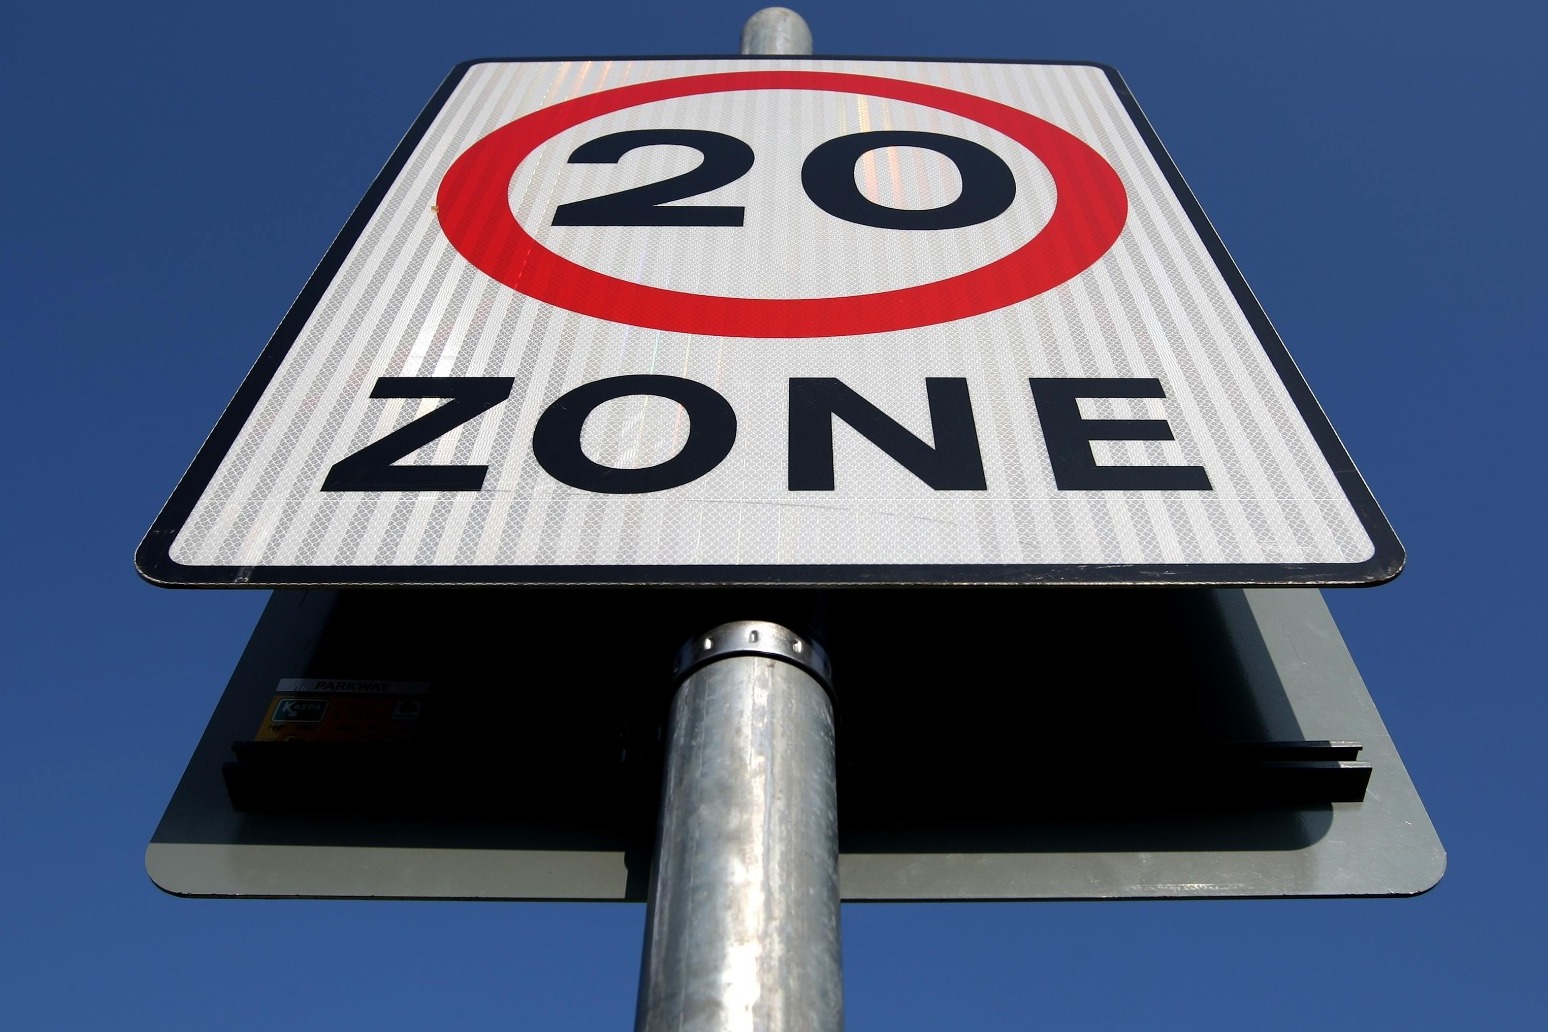 Drivers warned not to rely on sat navs when Welsh roads switch to 20mph 